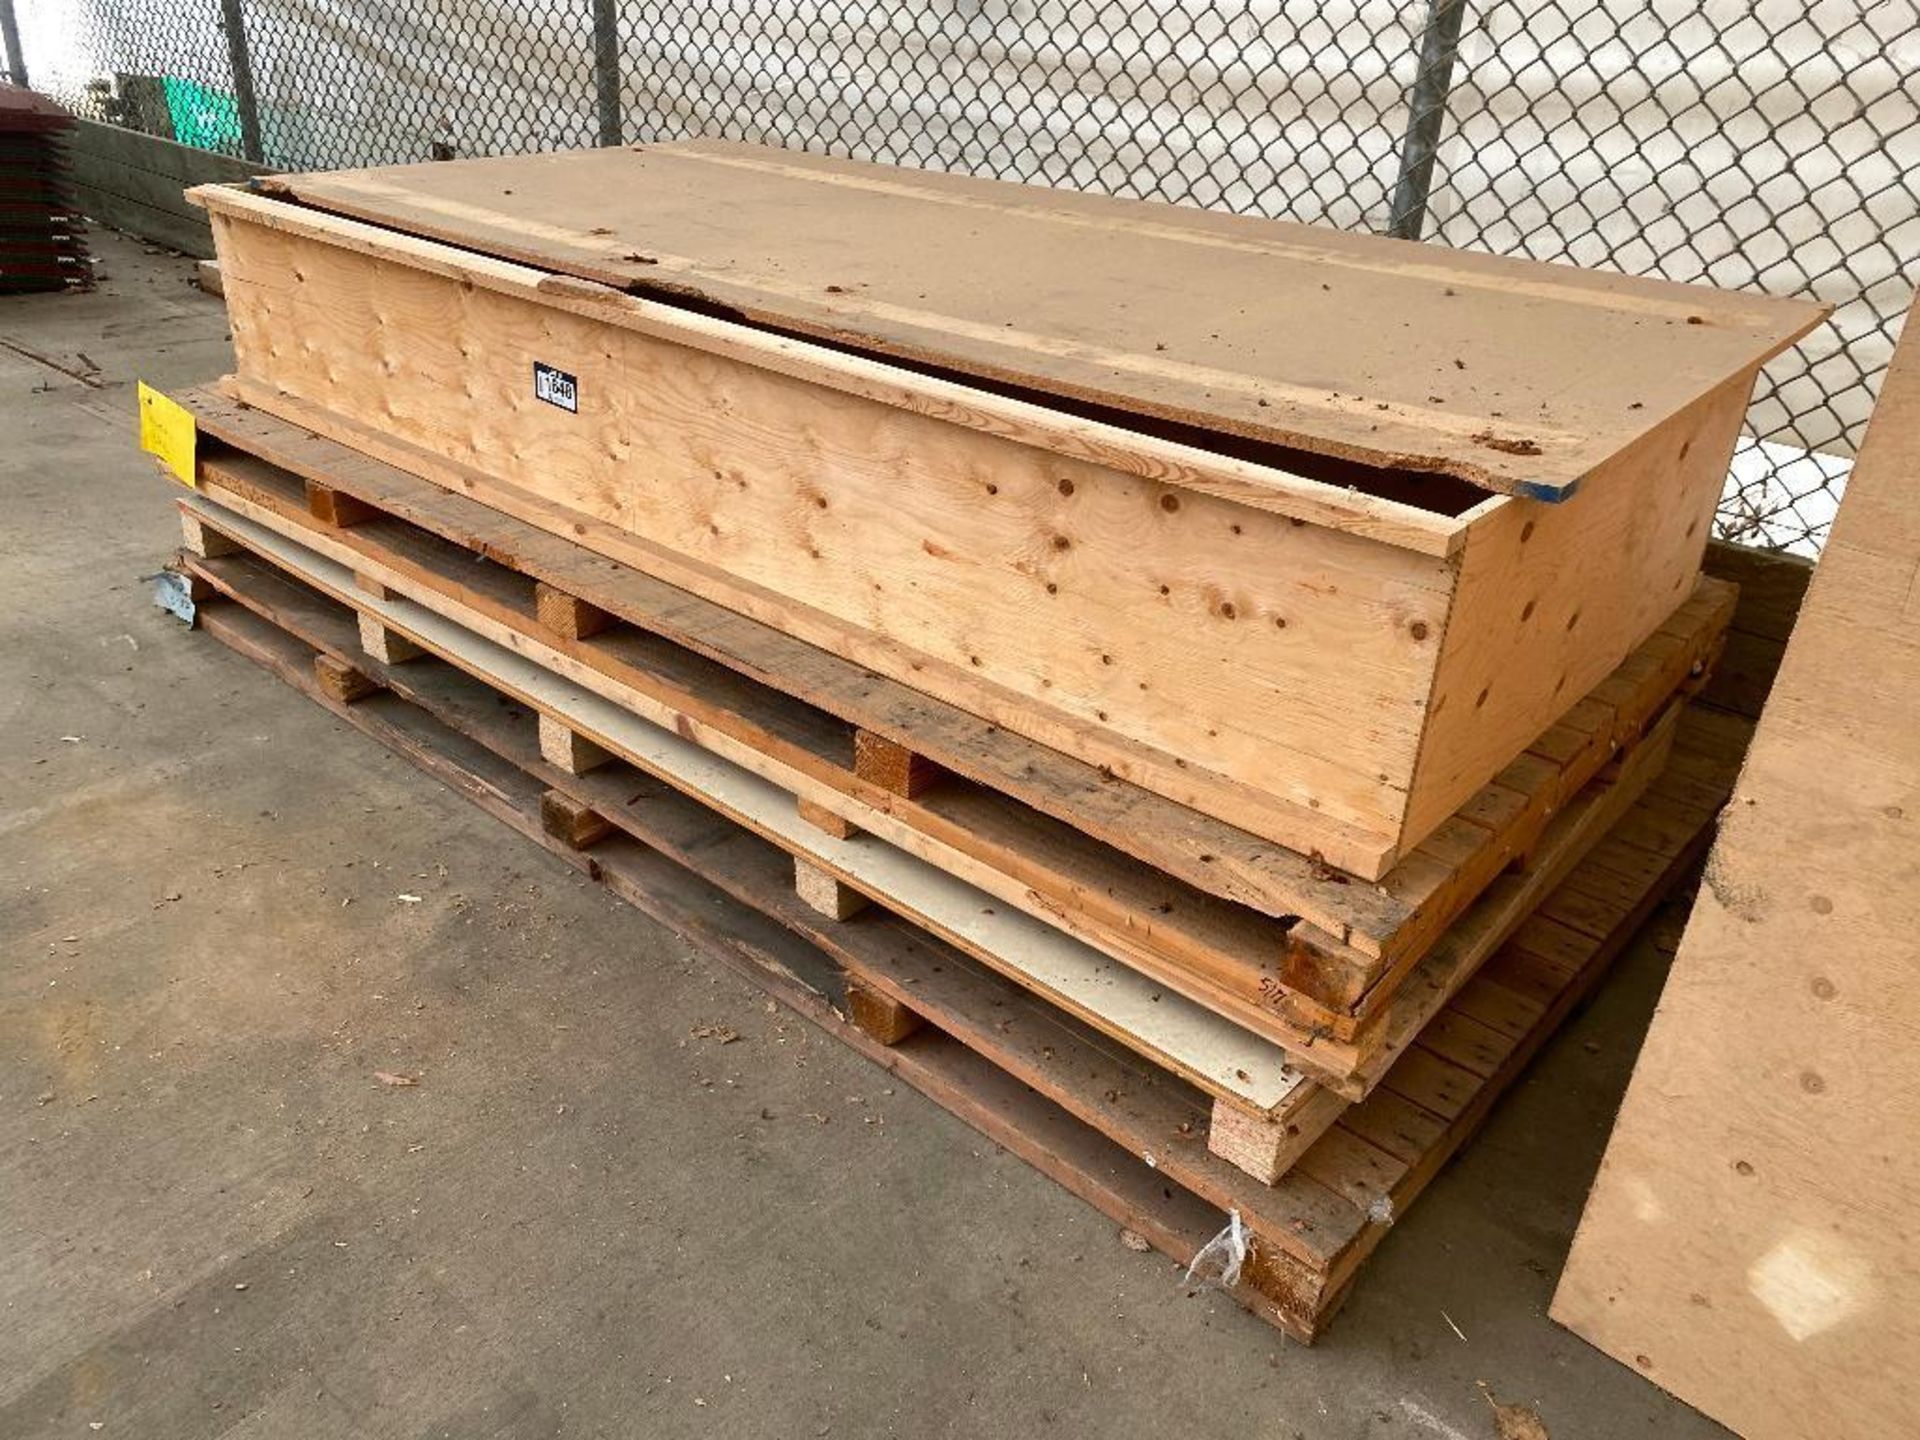 Lot of (4) 50" X 102" Pallets and (1) 8' X 40" Crate - Image 2 of 2